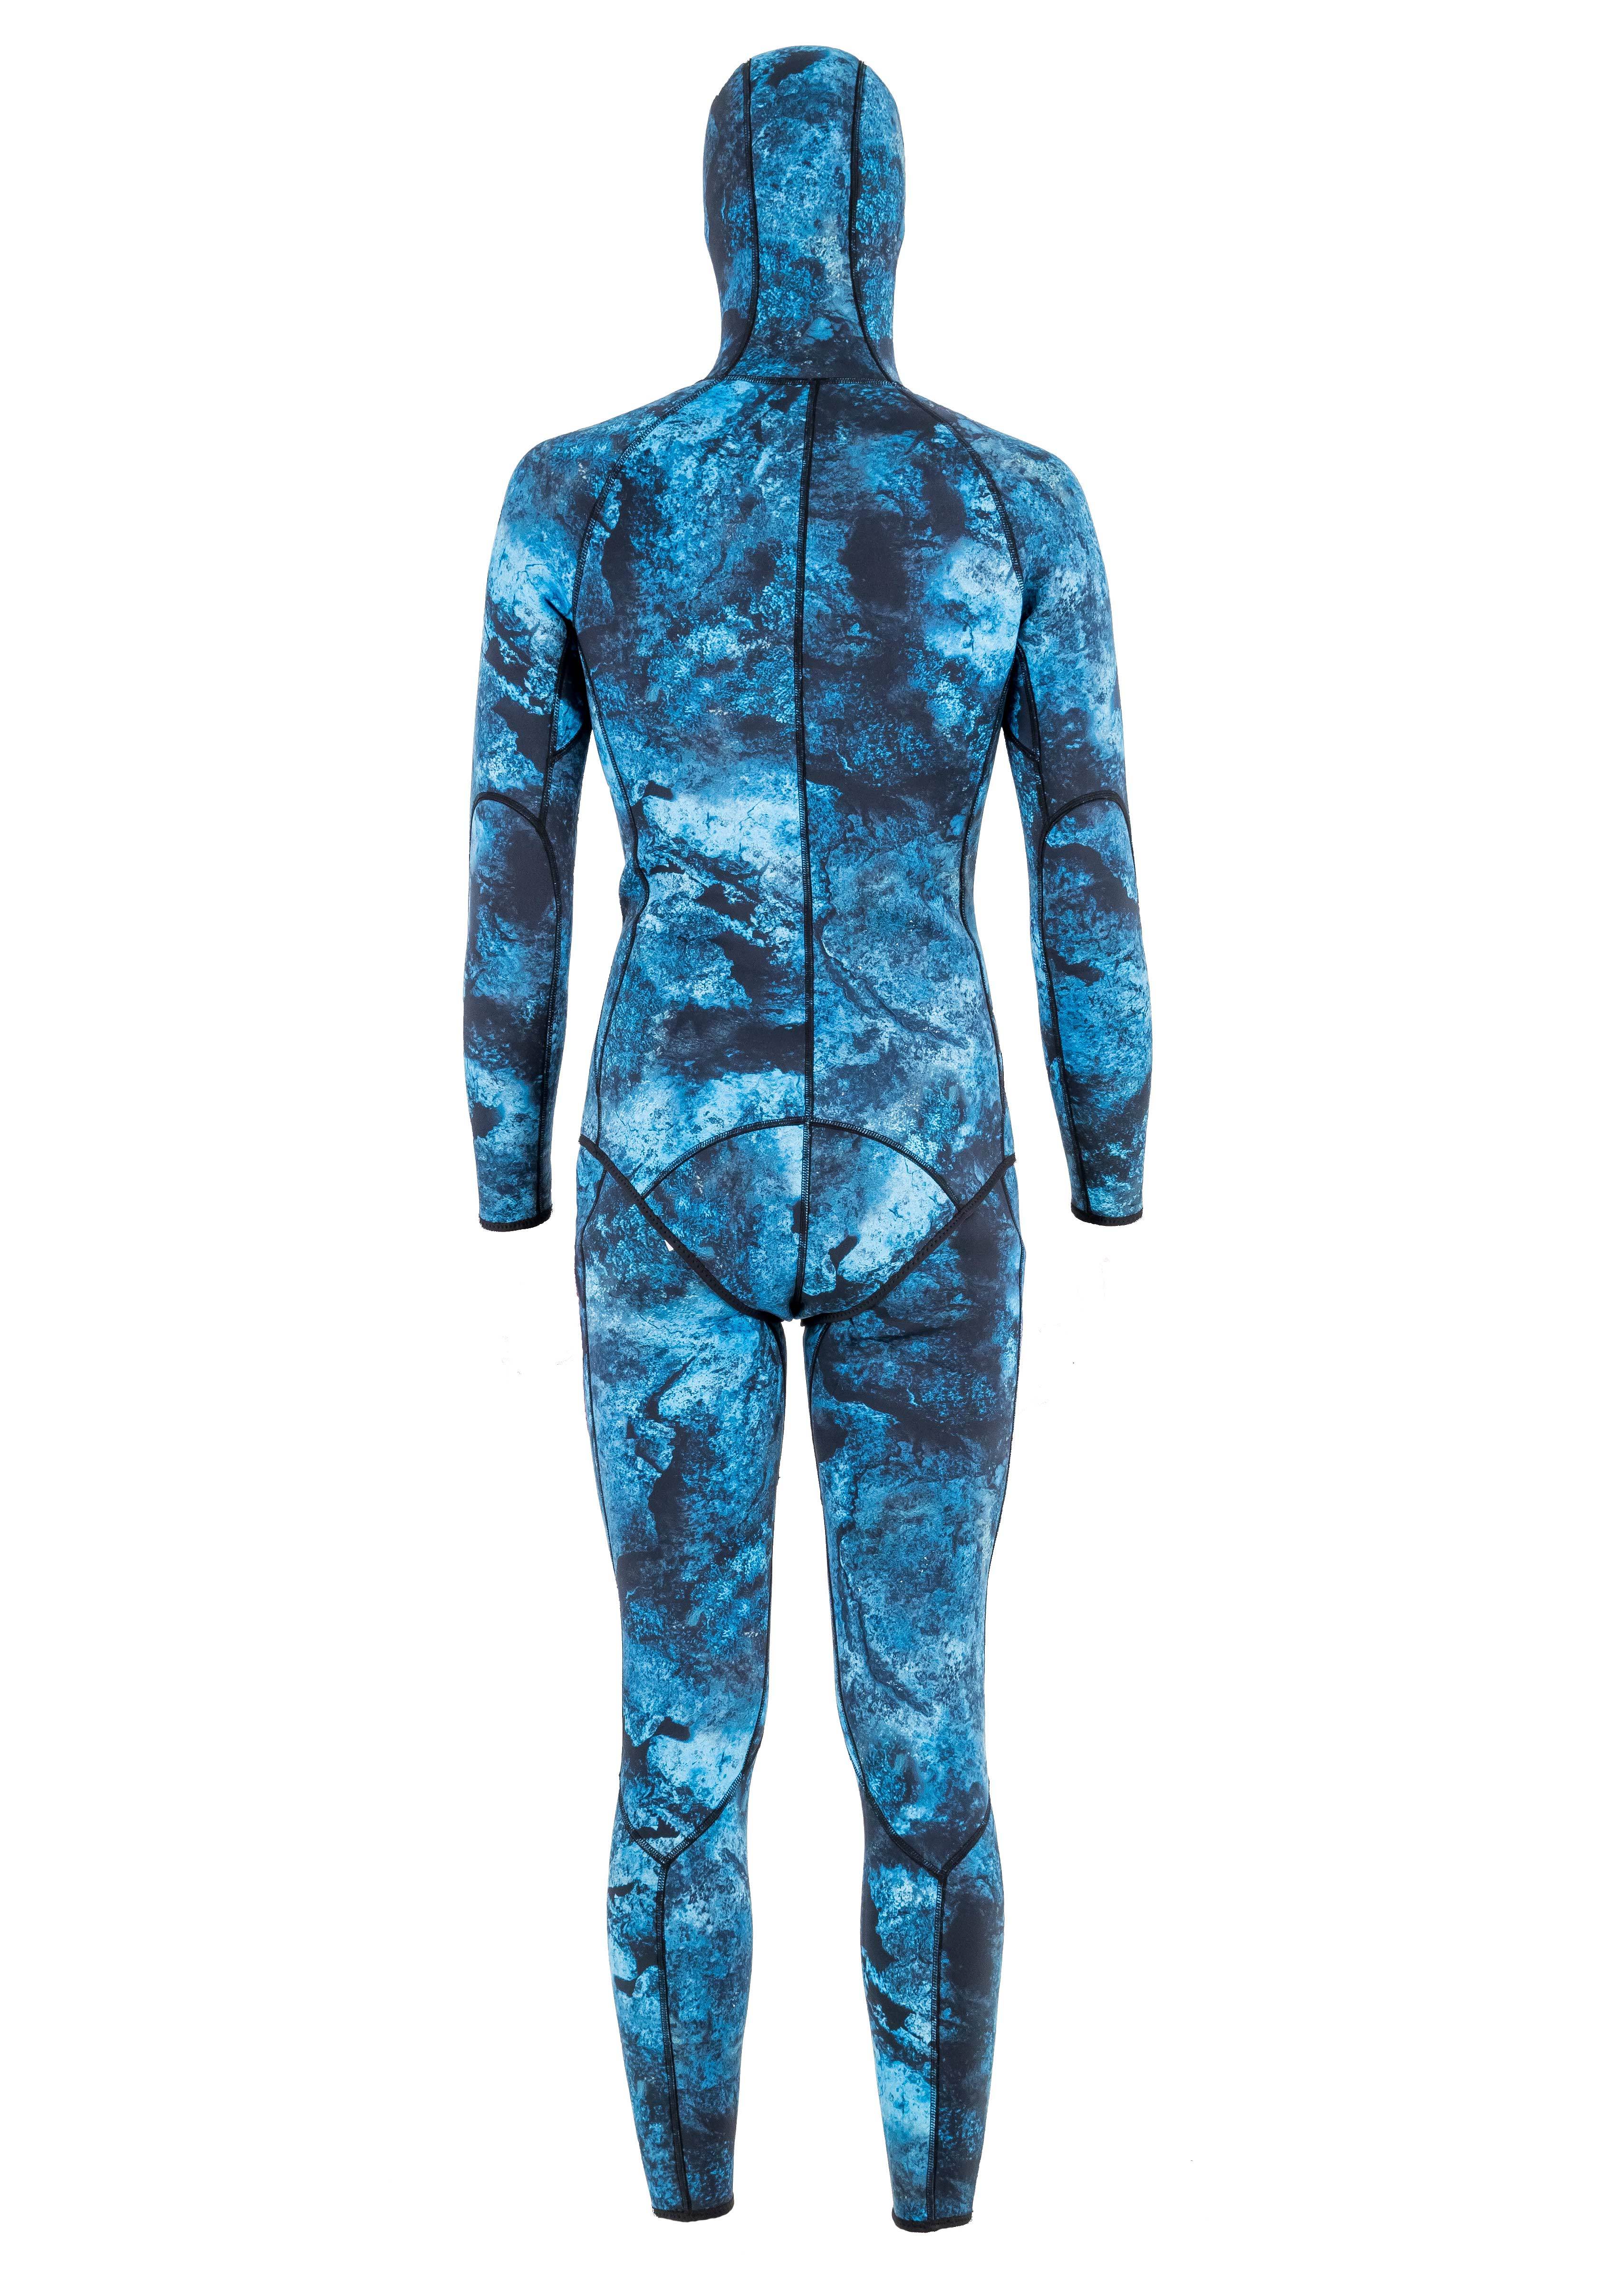 Aropec Mens Azul 2mm Lined 2 Piece Wetsuit - Adreno - Ocean Outfitters